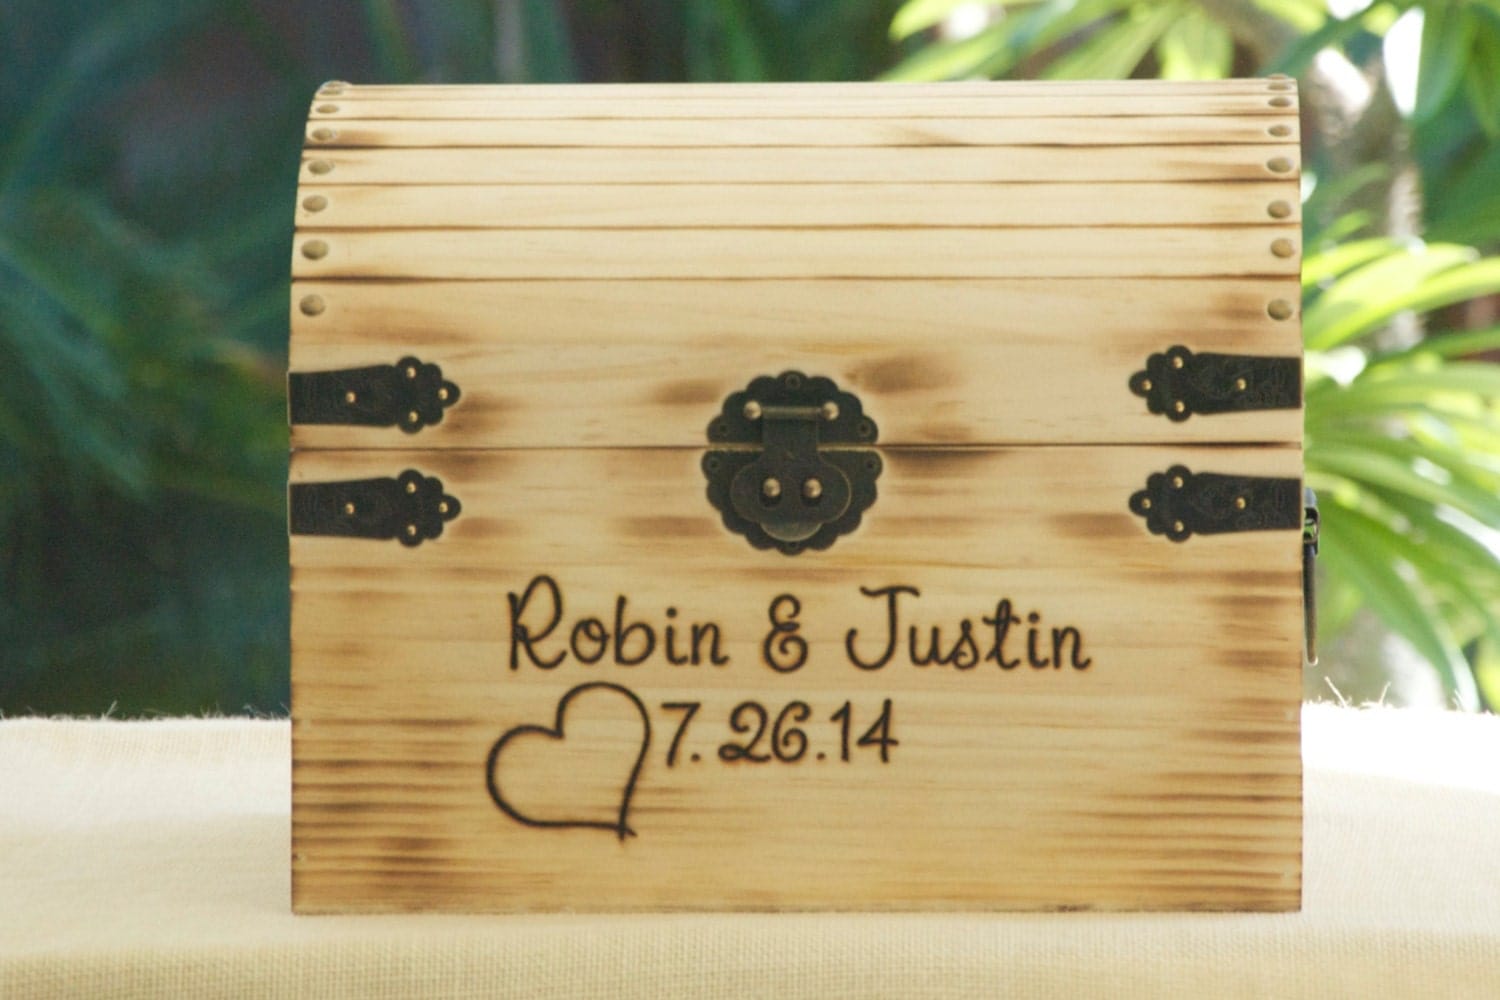 Medium Rustic Wedding Card Box - Treasure Chest - Burned/Engraved - Personalized Rustic Card Box - Torched and hand Burned/Engraved